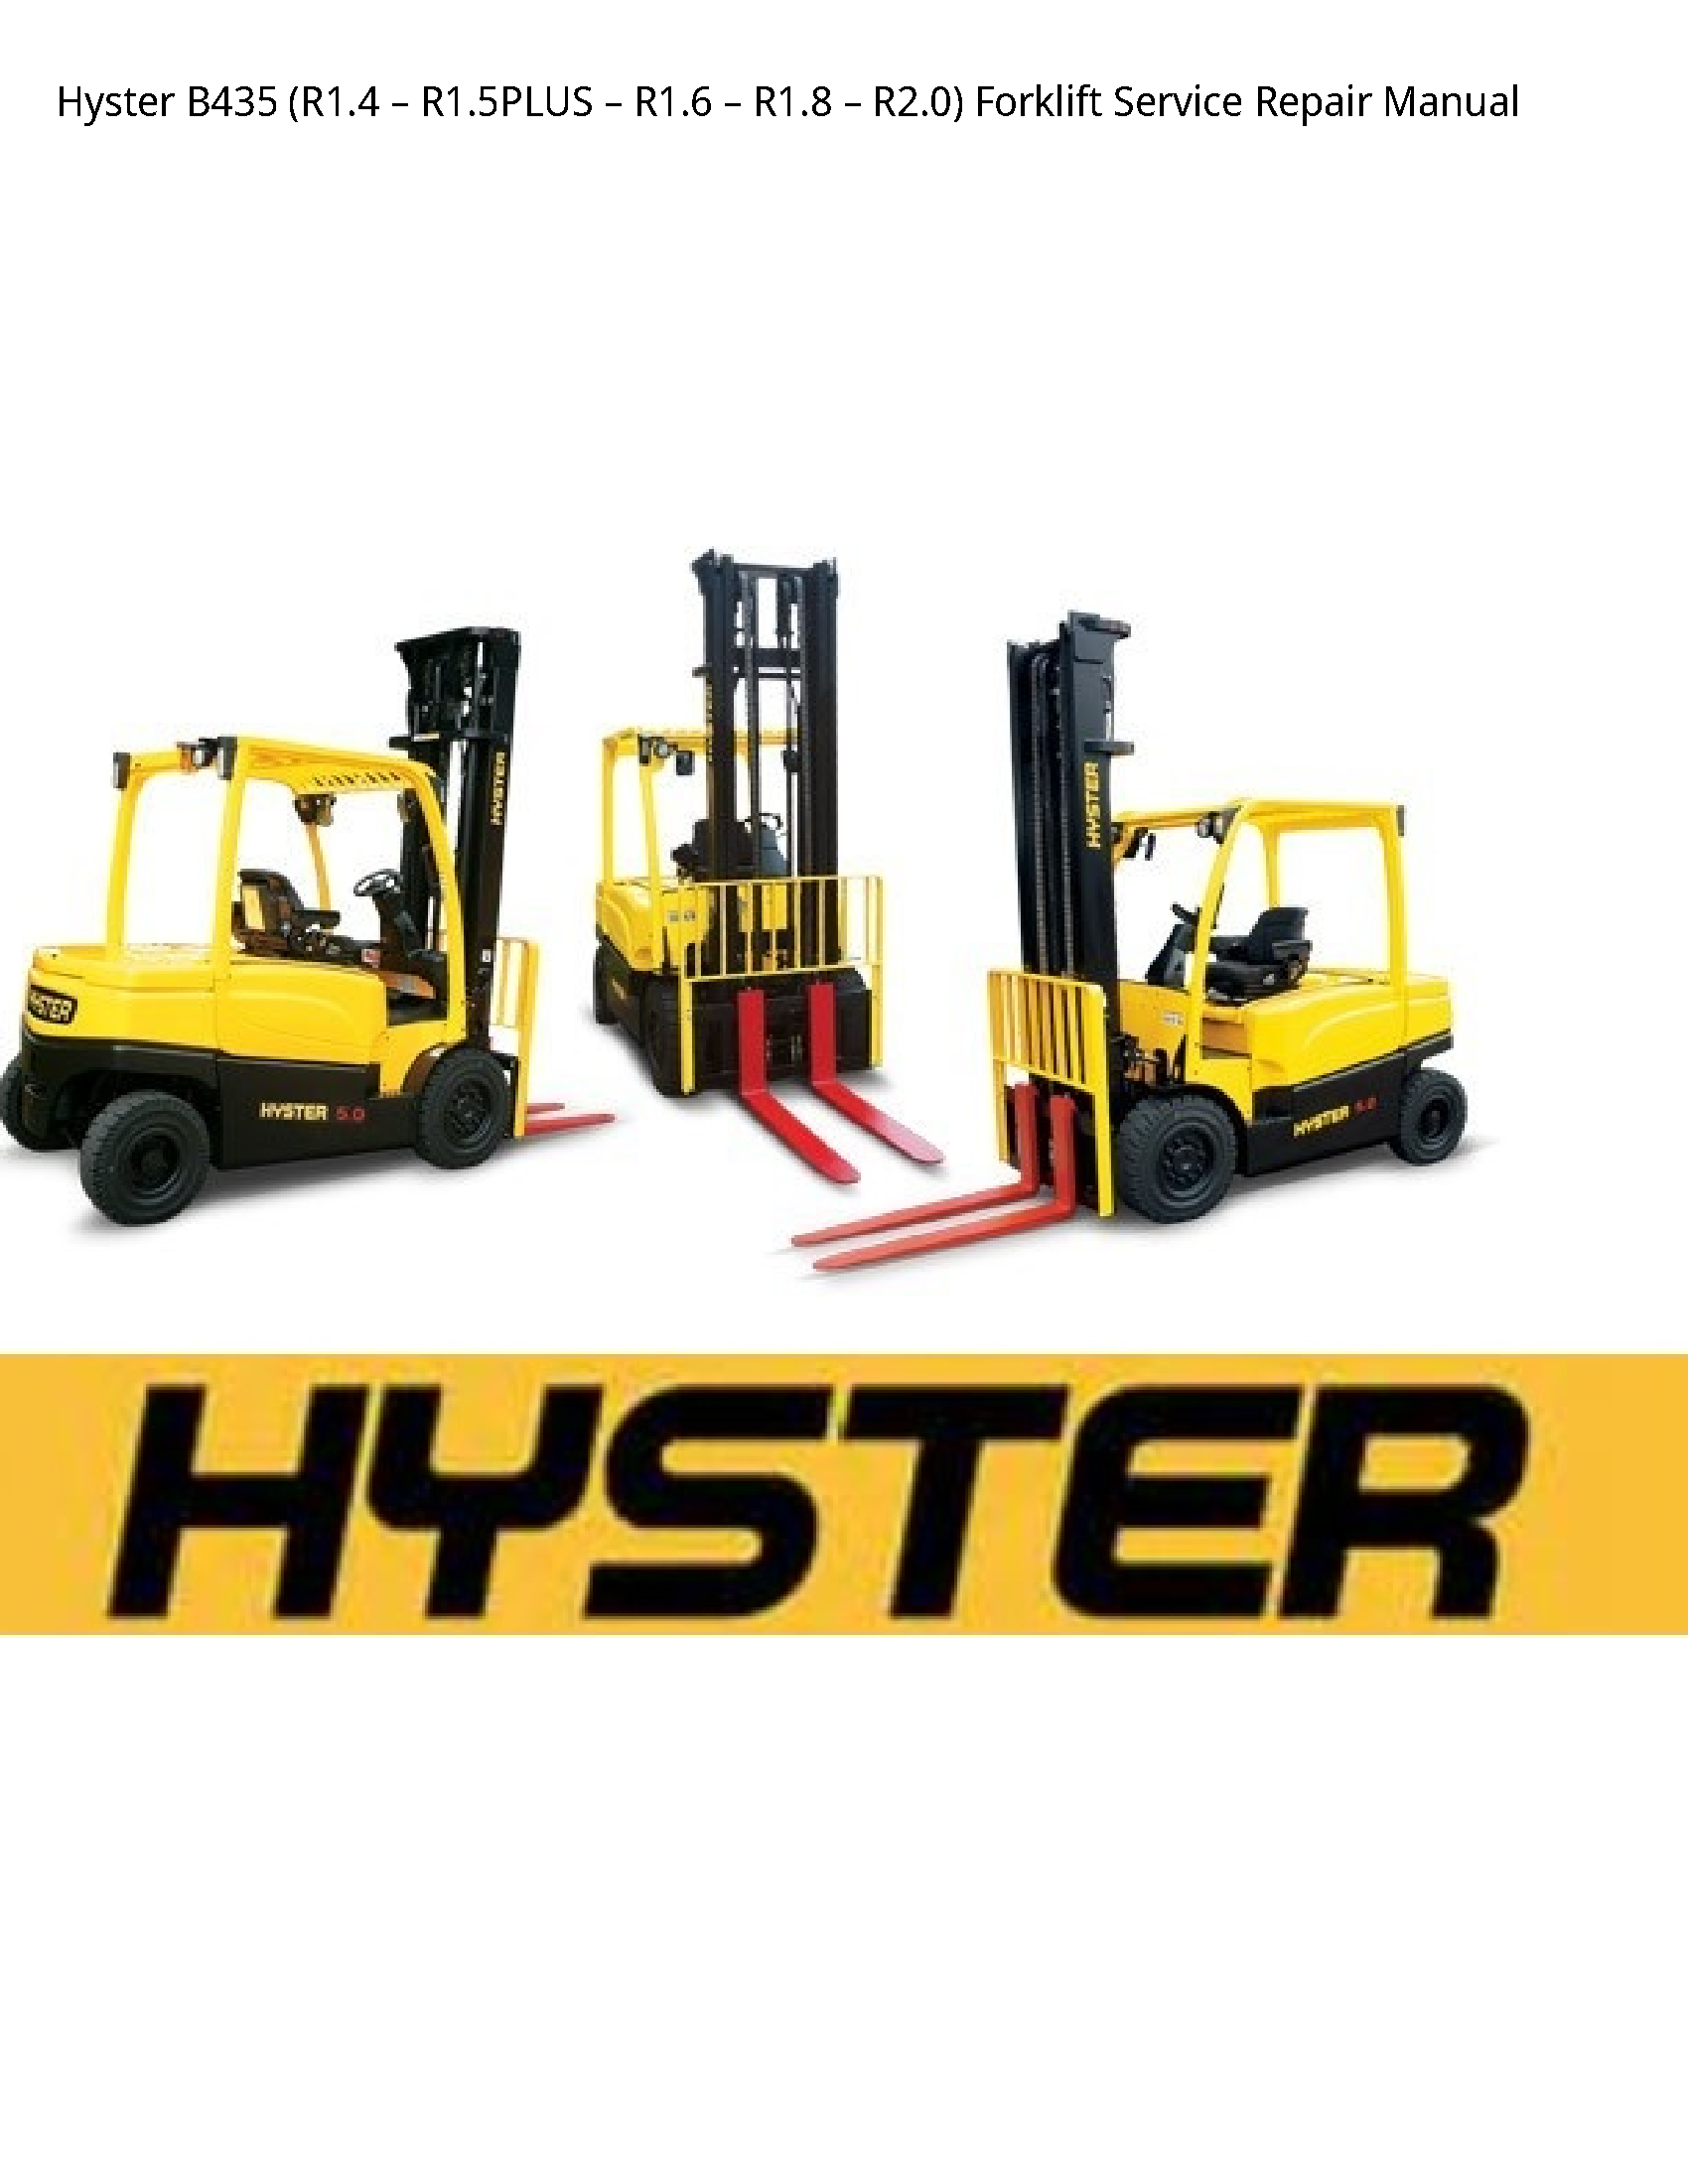 Hyster B435 Forklift manual